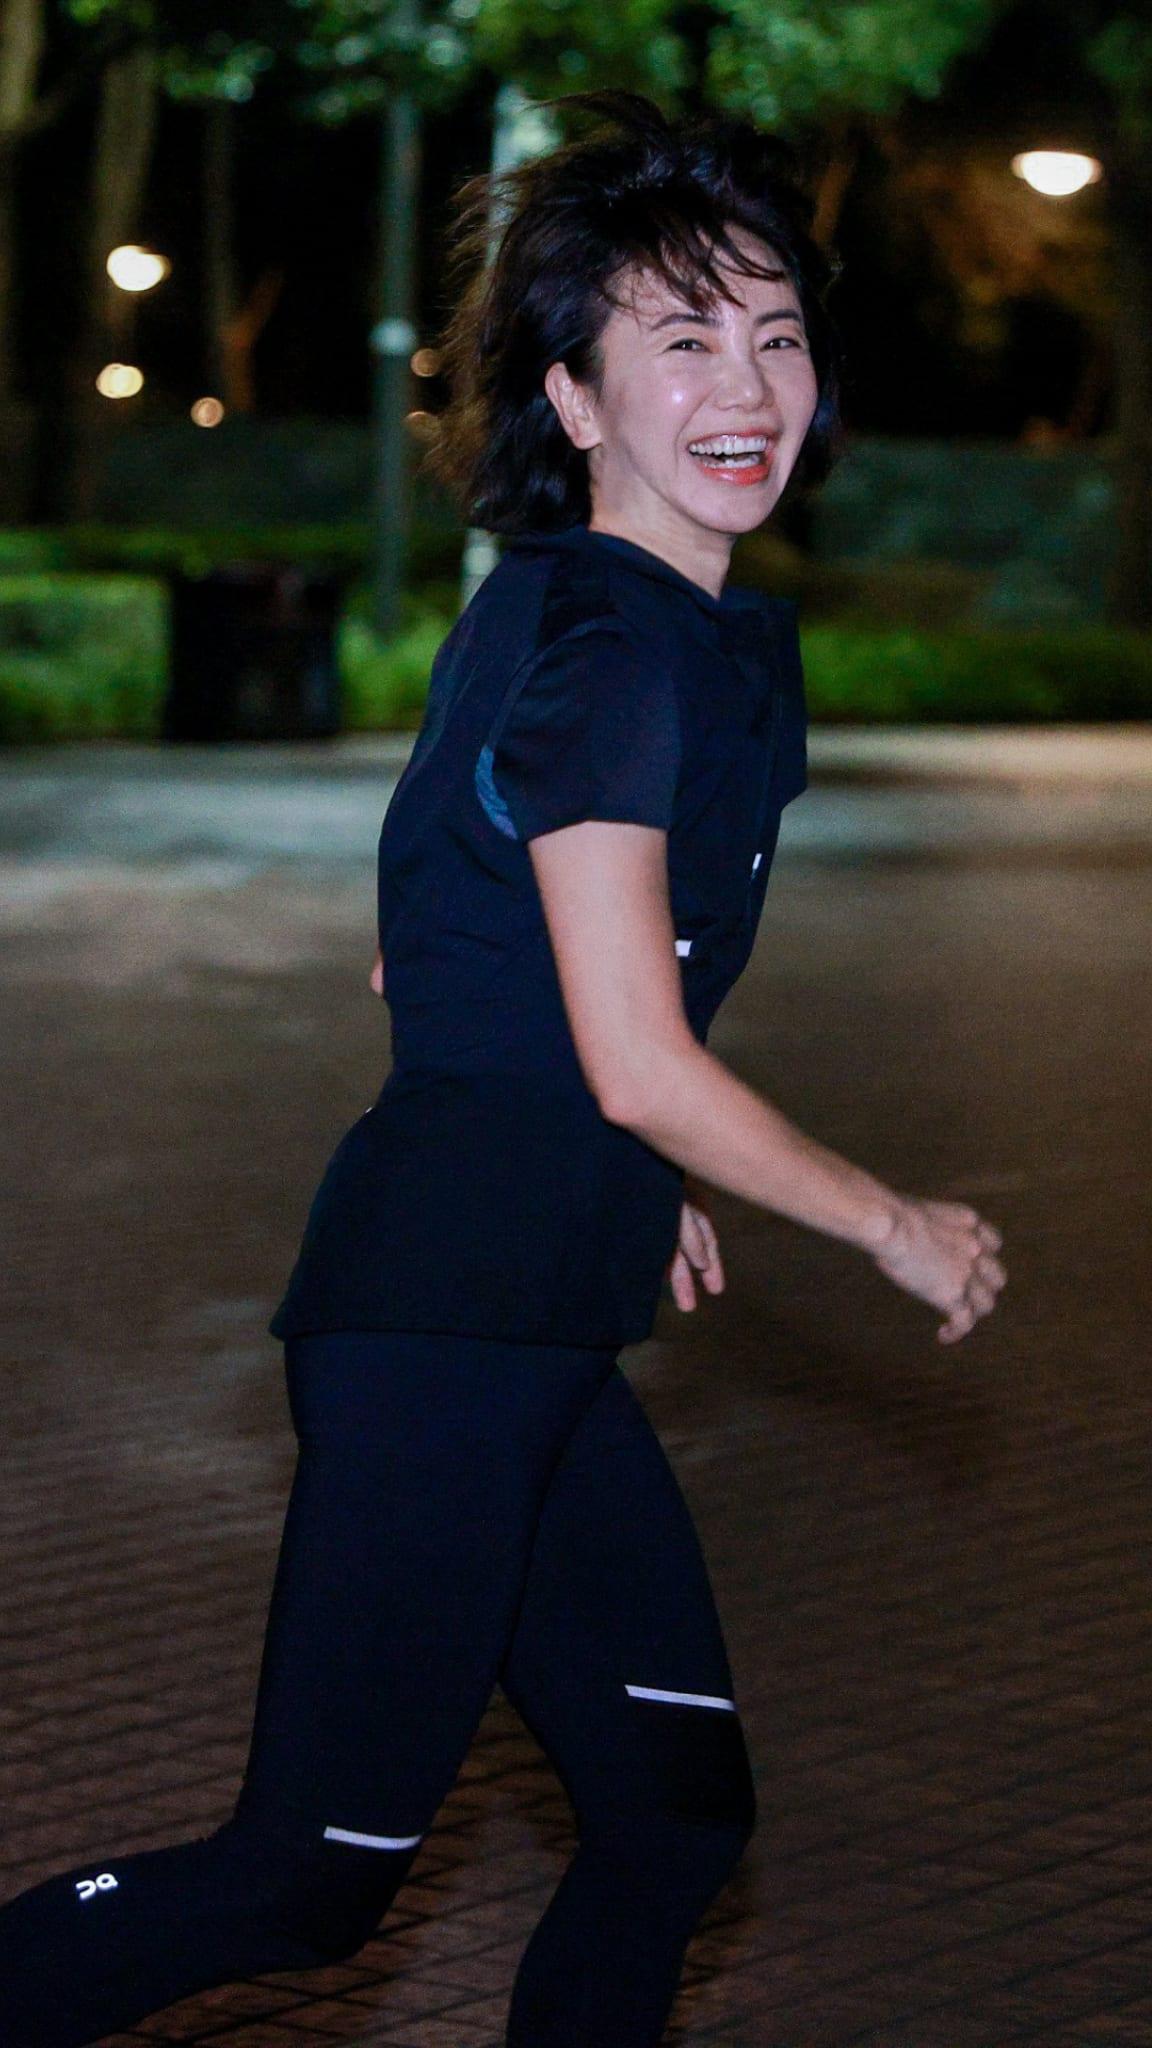 A woman running at night whilst smiling at the camera.